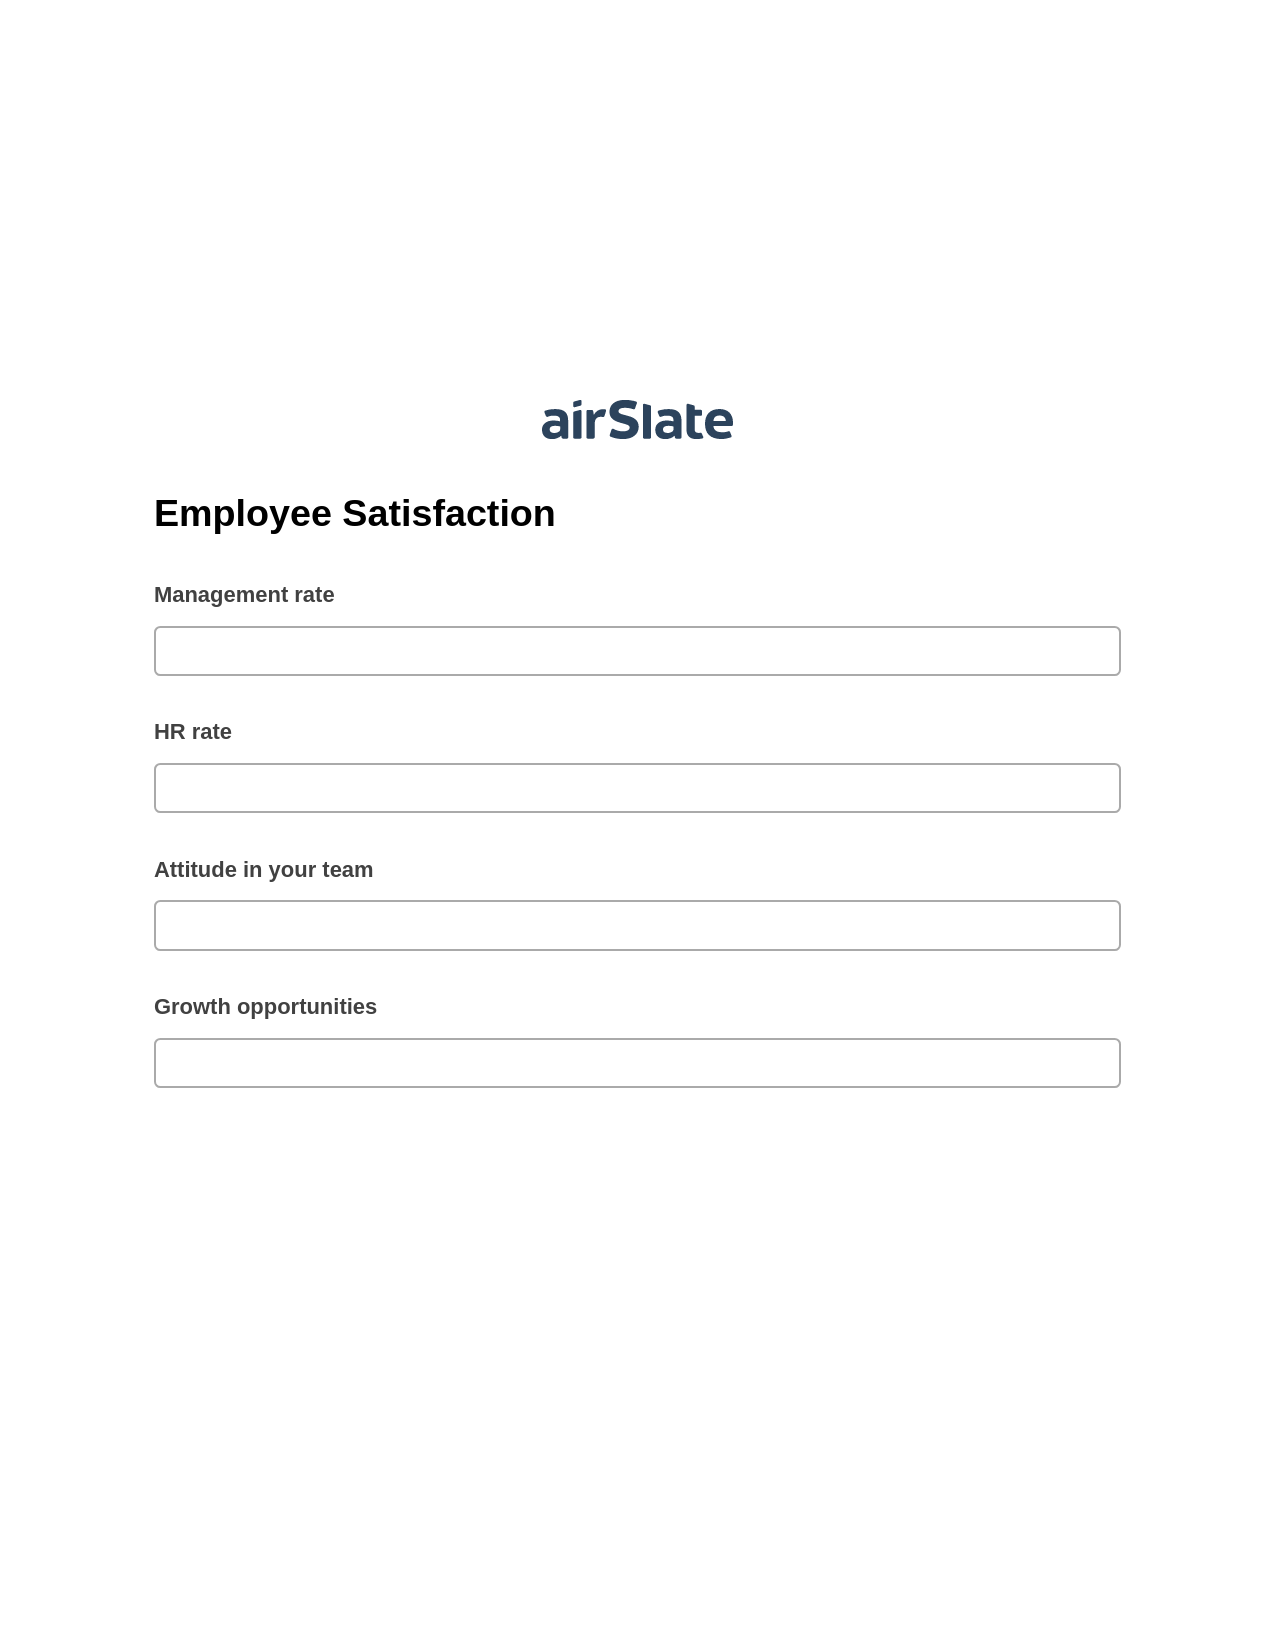 Employee Satisfaction Pre-fill Dropdowns from Excel Bot, Webhook Bot, Archive to SharePoint Folder Bot